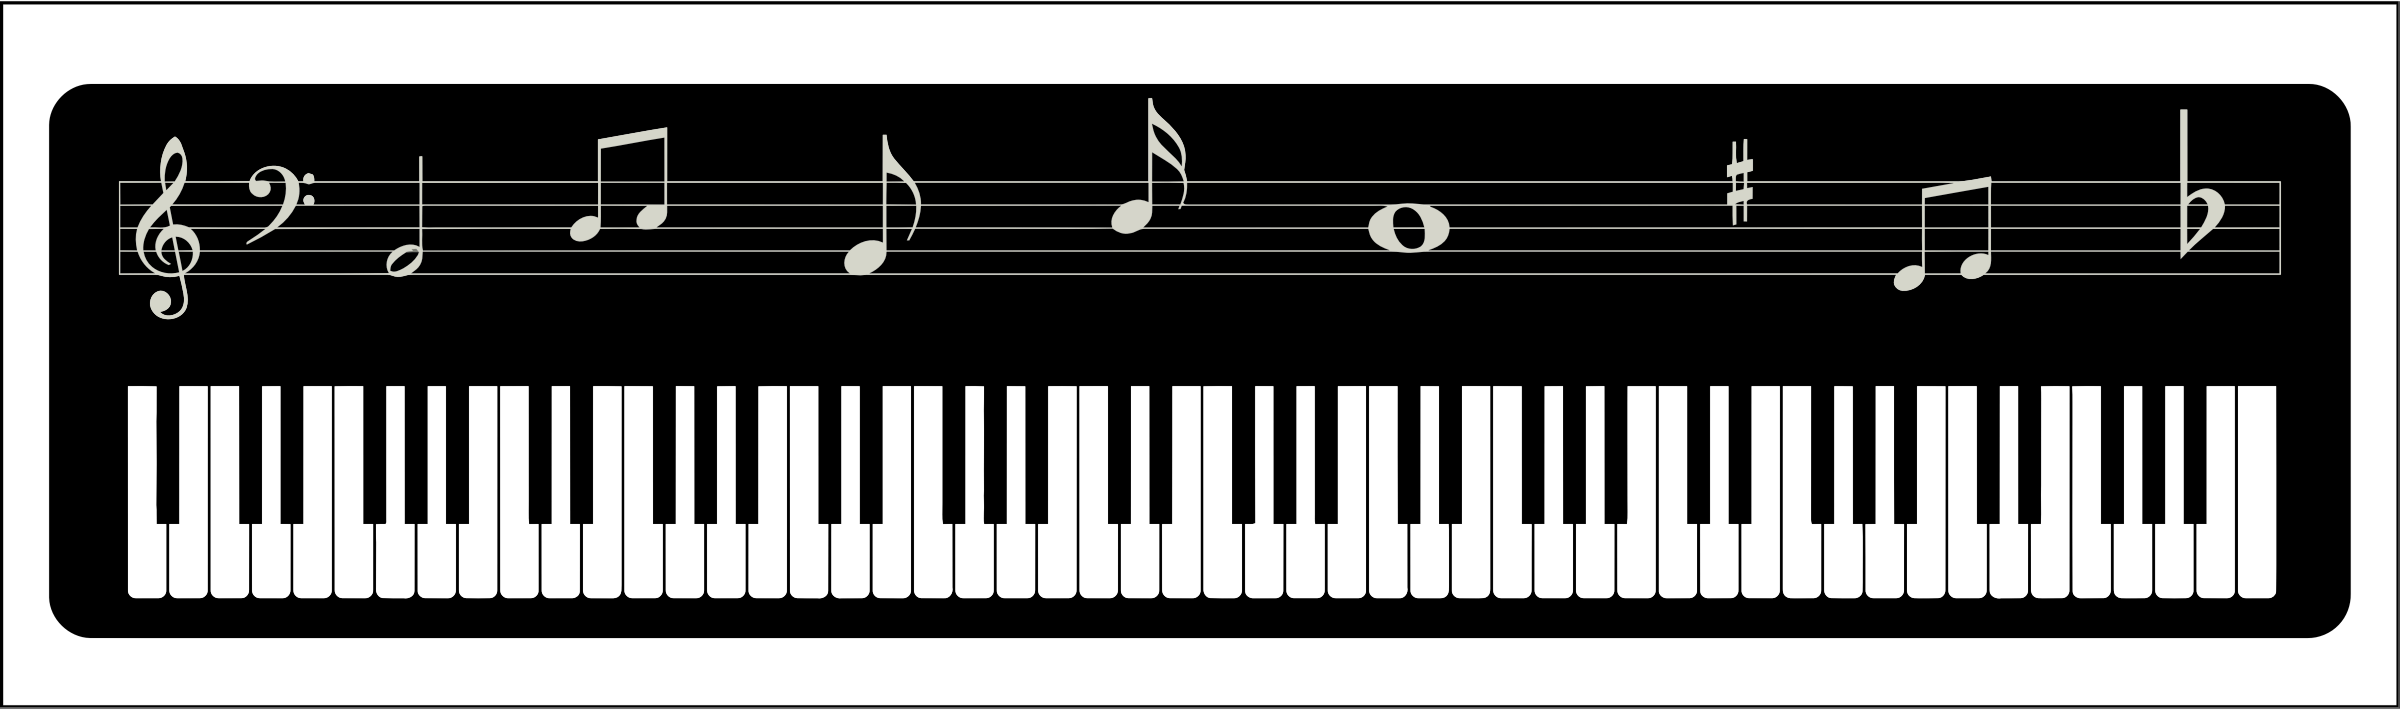 Download Piano Keyboard with Notes vector file image - Free stock ...